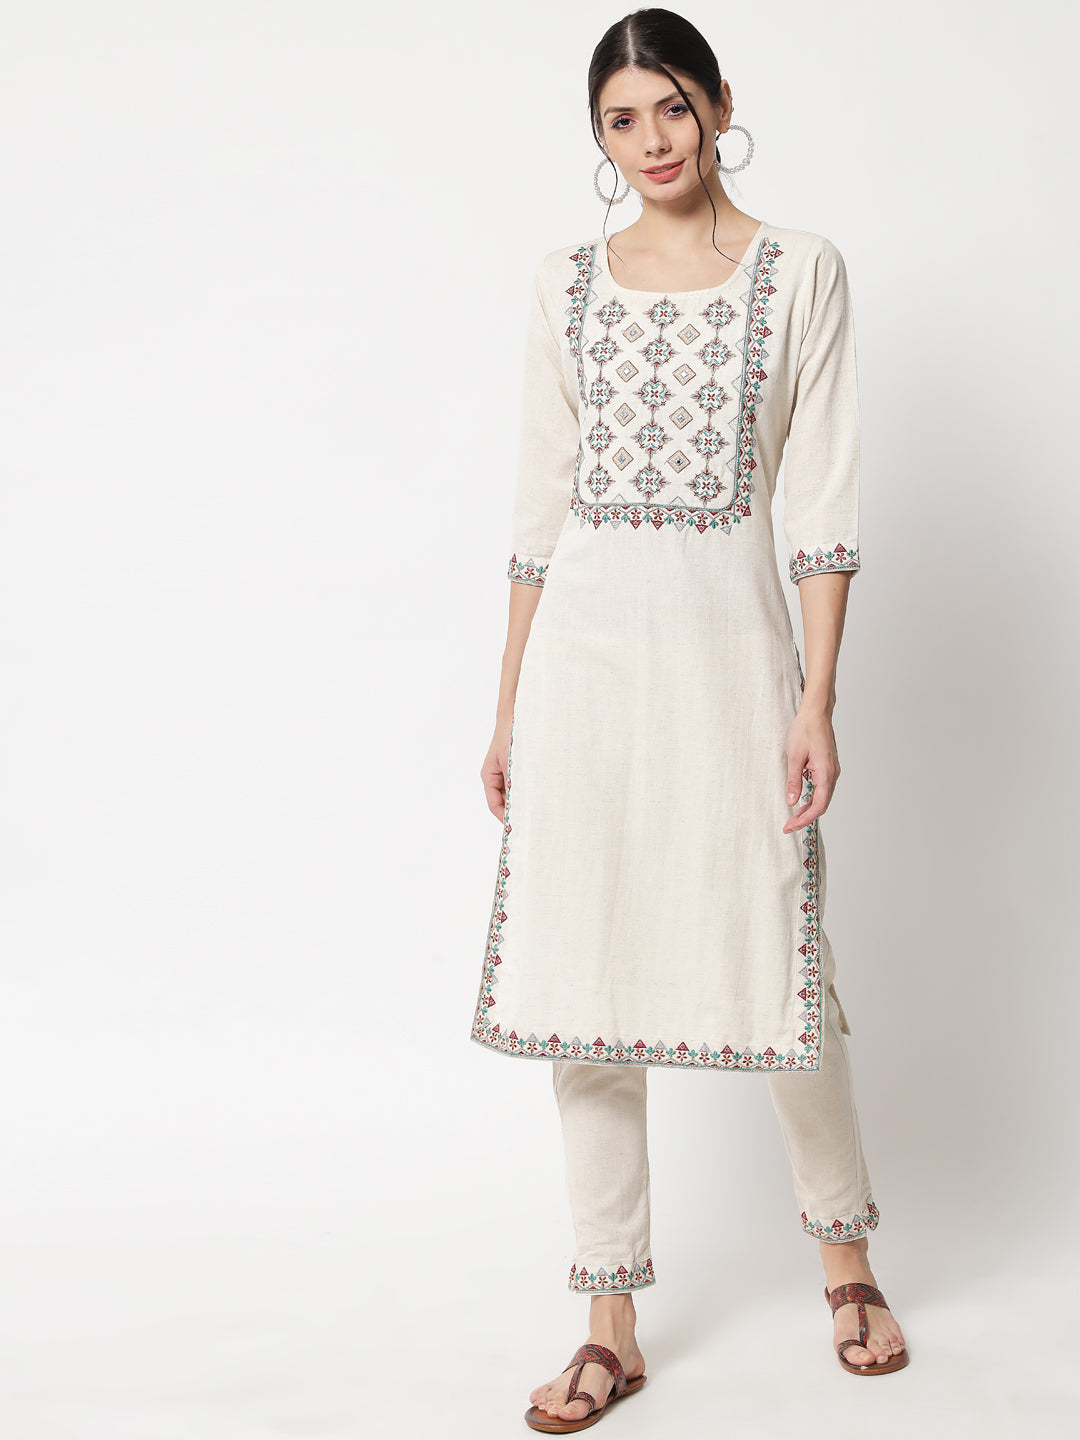 Women's Off-White & Maroon Embroidered Kurta With Trousers - Meeranshi